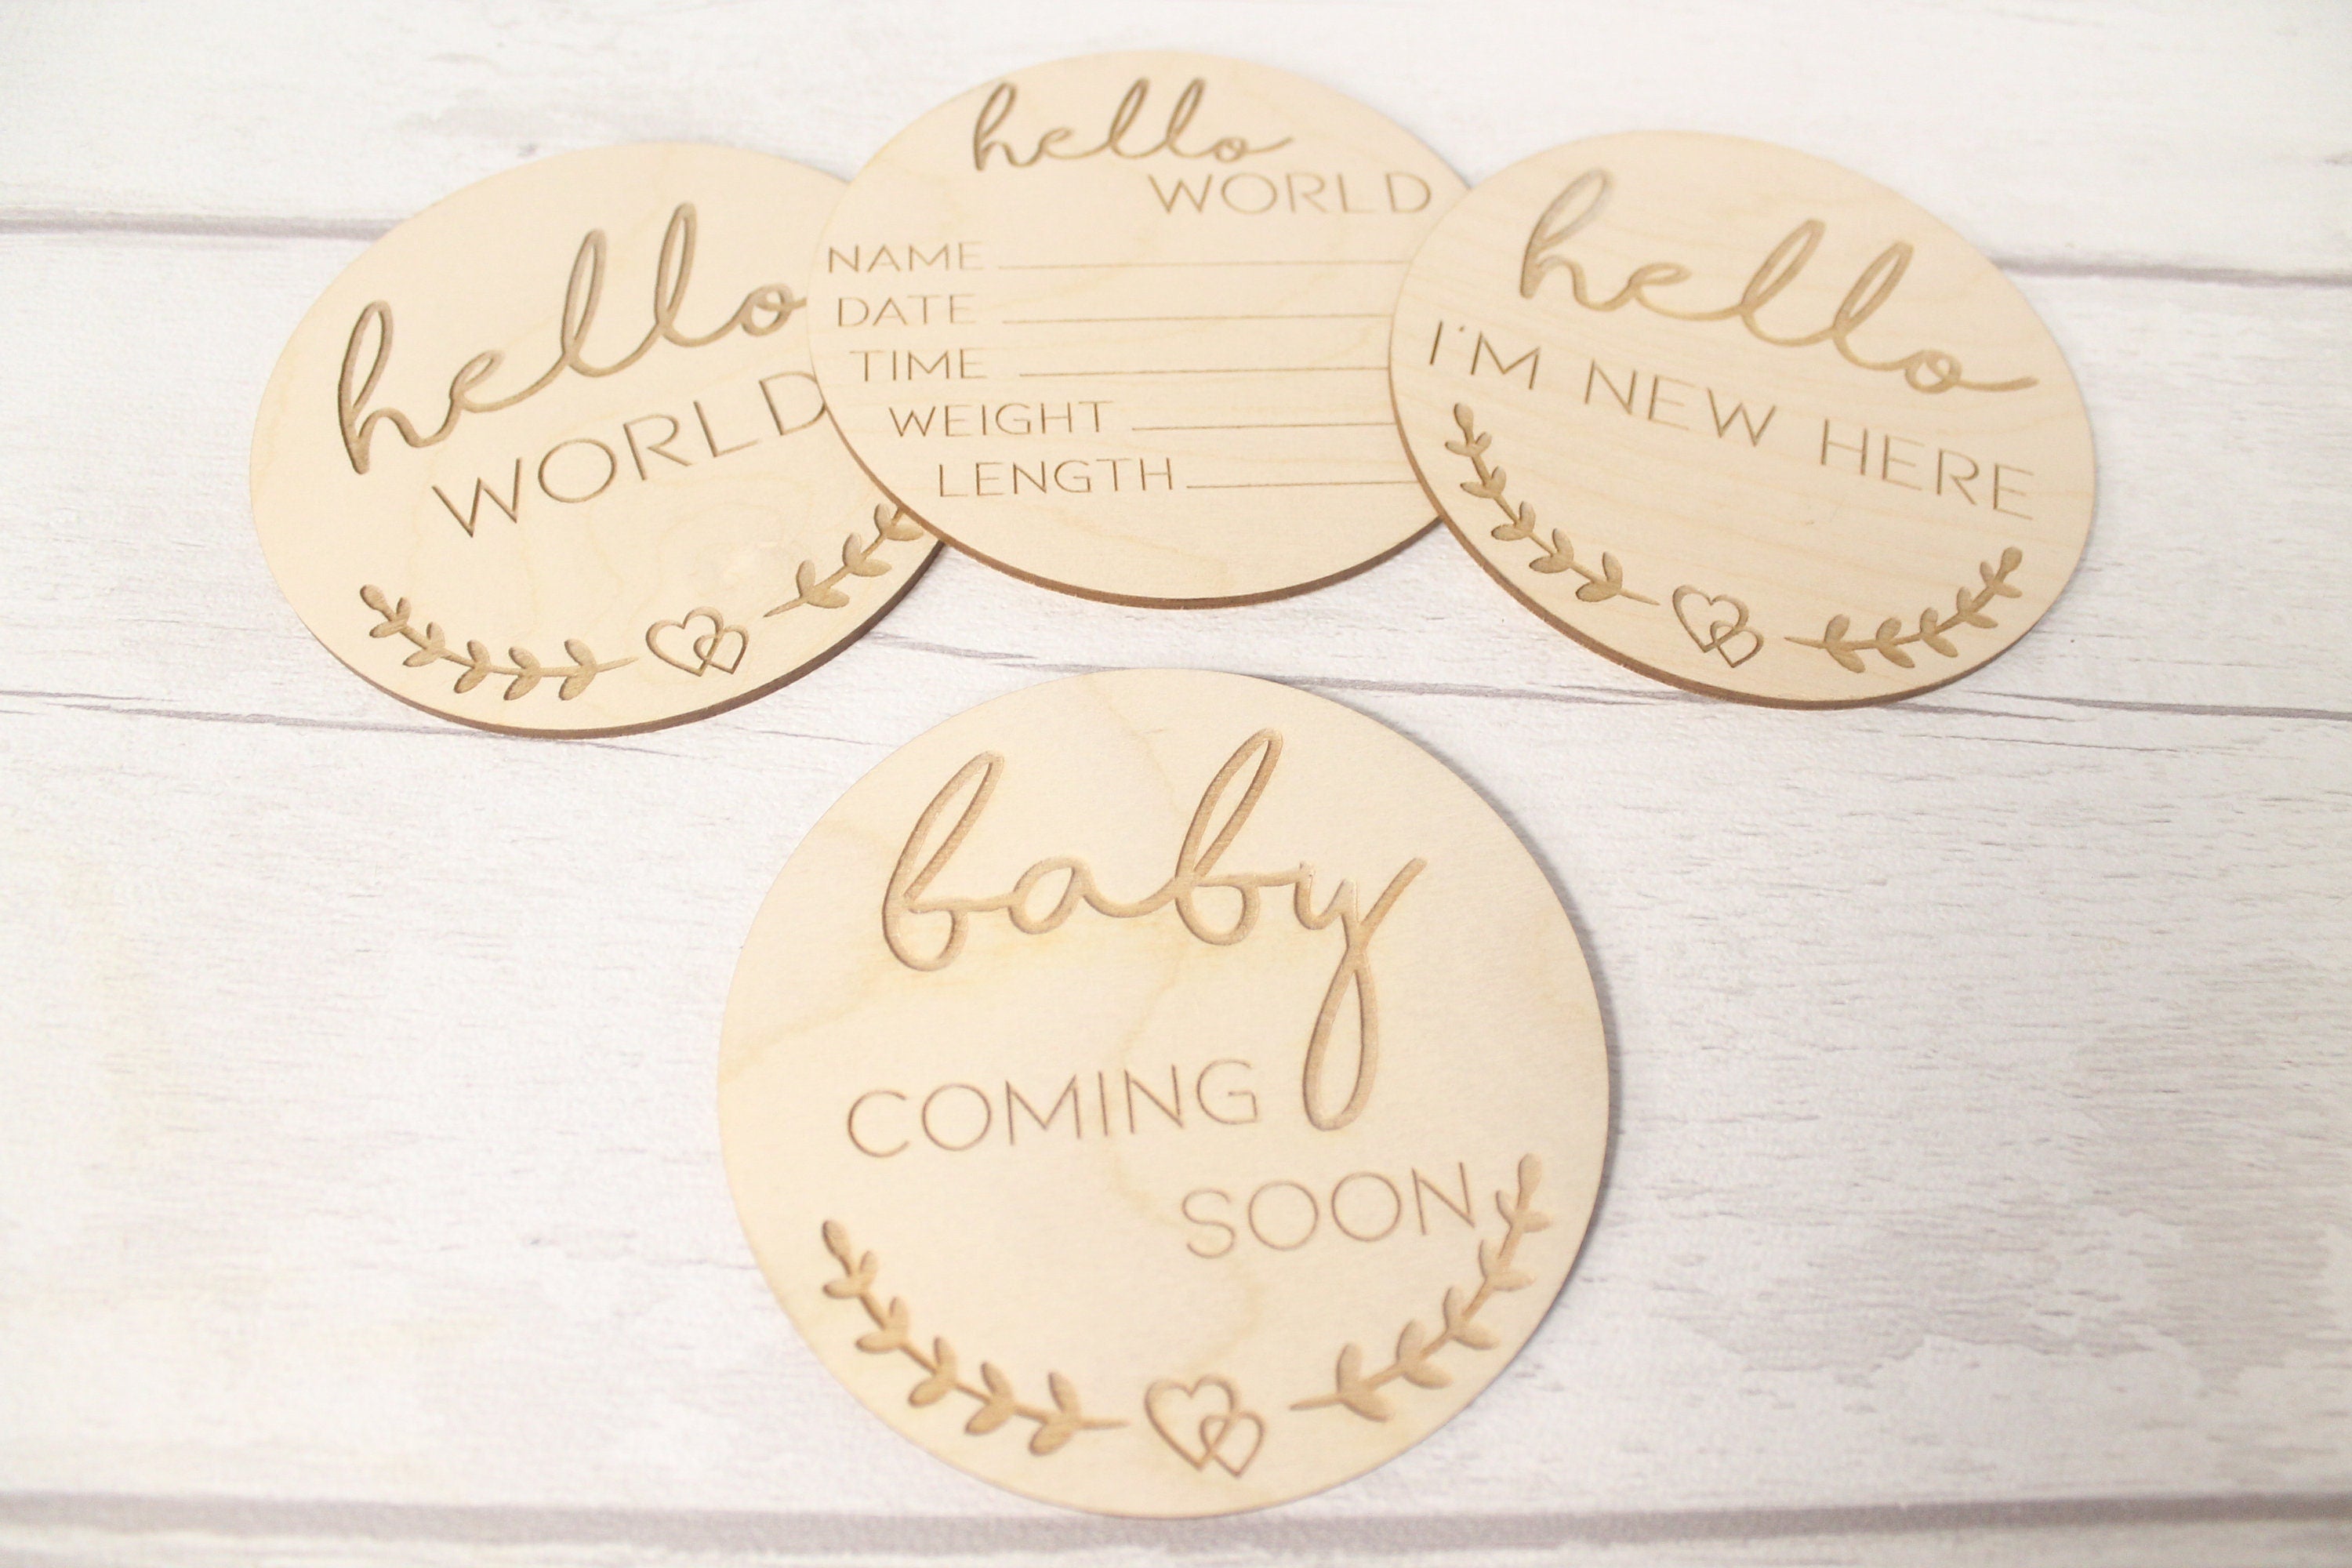 Baby Announcement Disc - New Baby Card - Hello World New Baby Gift - New Baby Photo Prop - Parent To Be or Baby Shower Gift -Milestone Disc